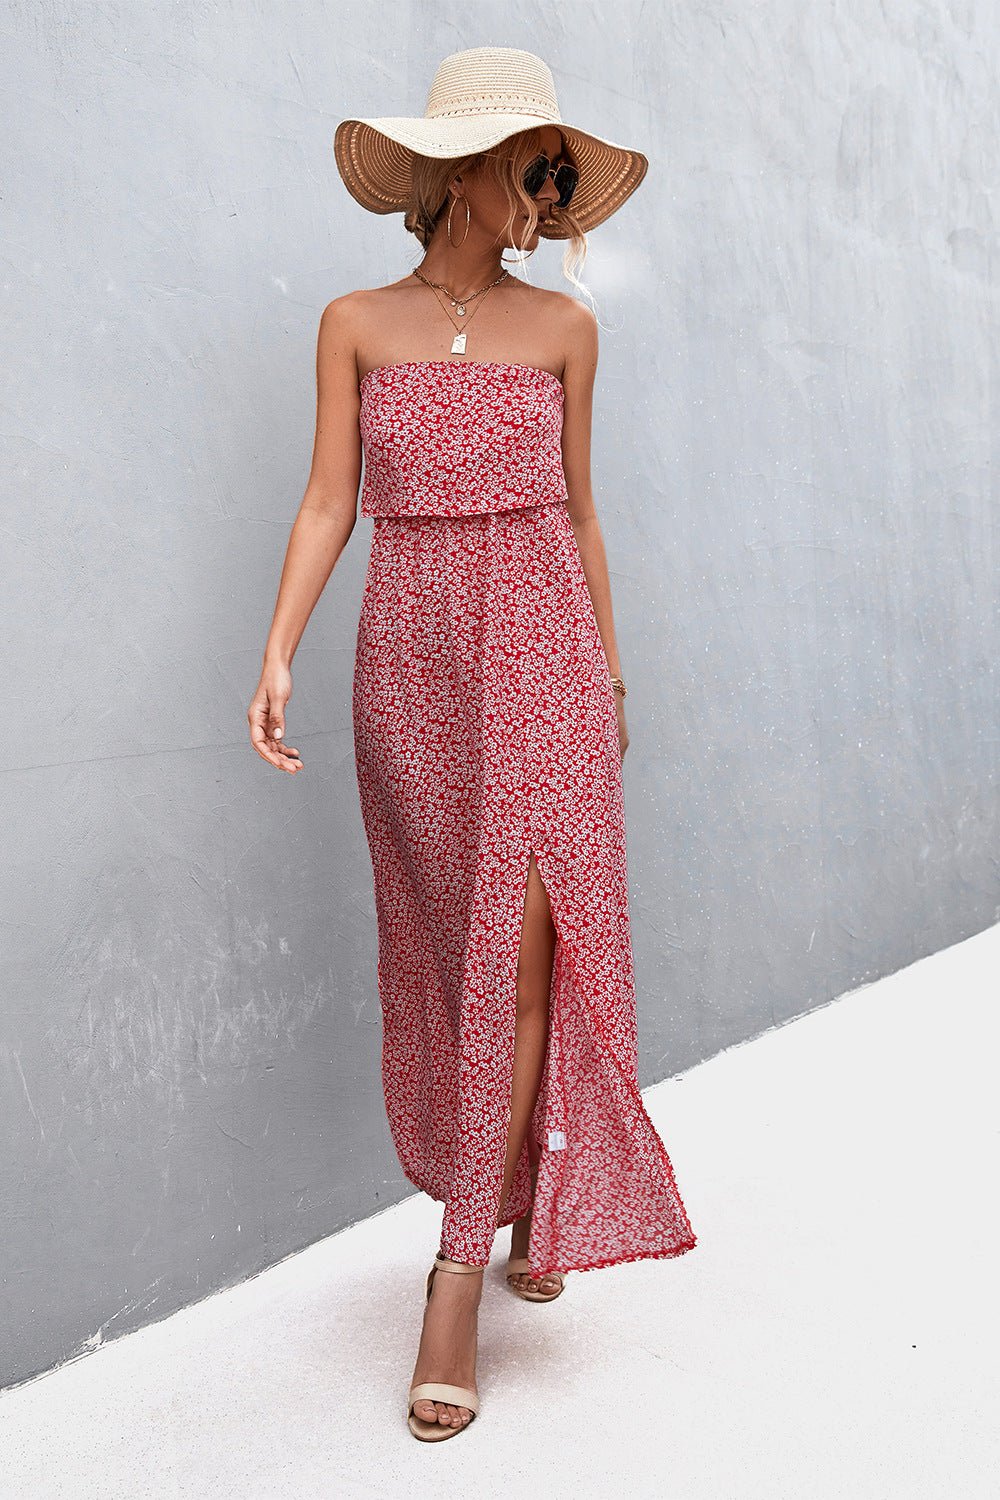 Strapless Maxi Dress Casual - red floral strapless maxi dress with split leg. A summer day outfit. #Firefly Lane Boutique1